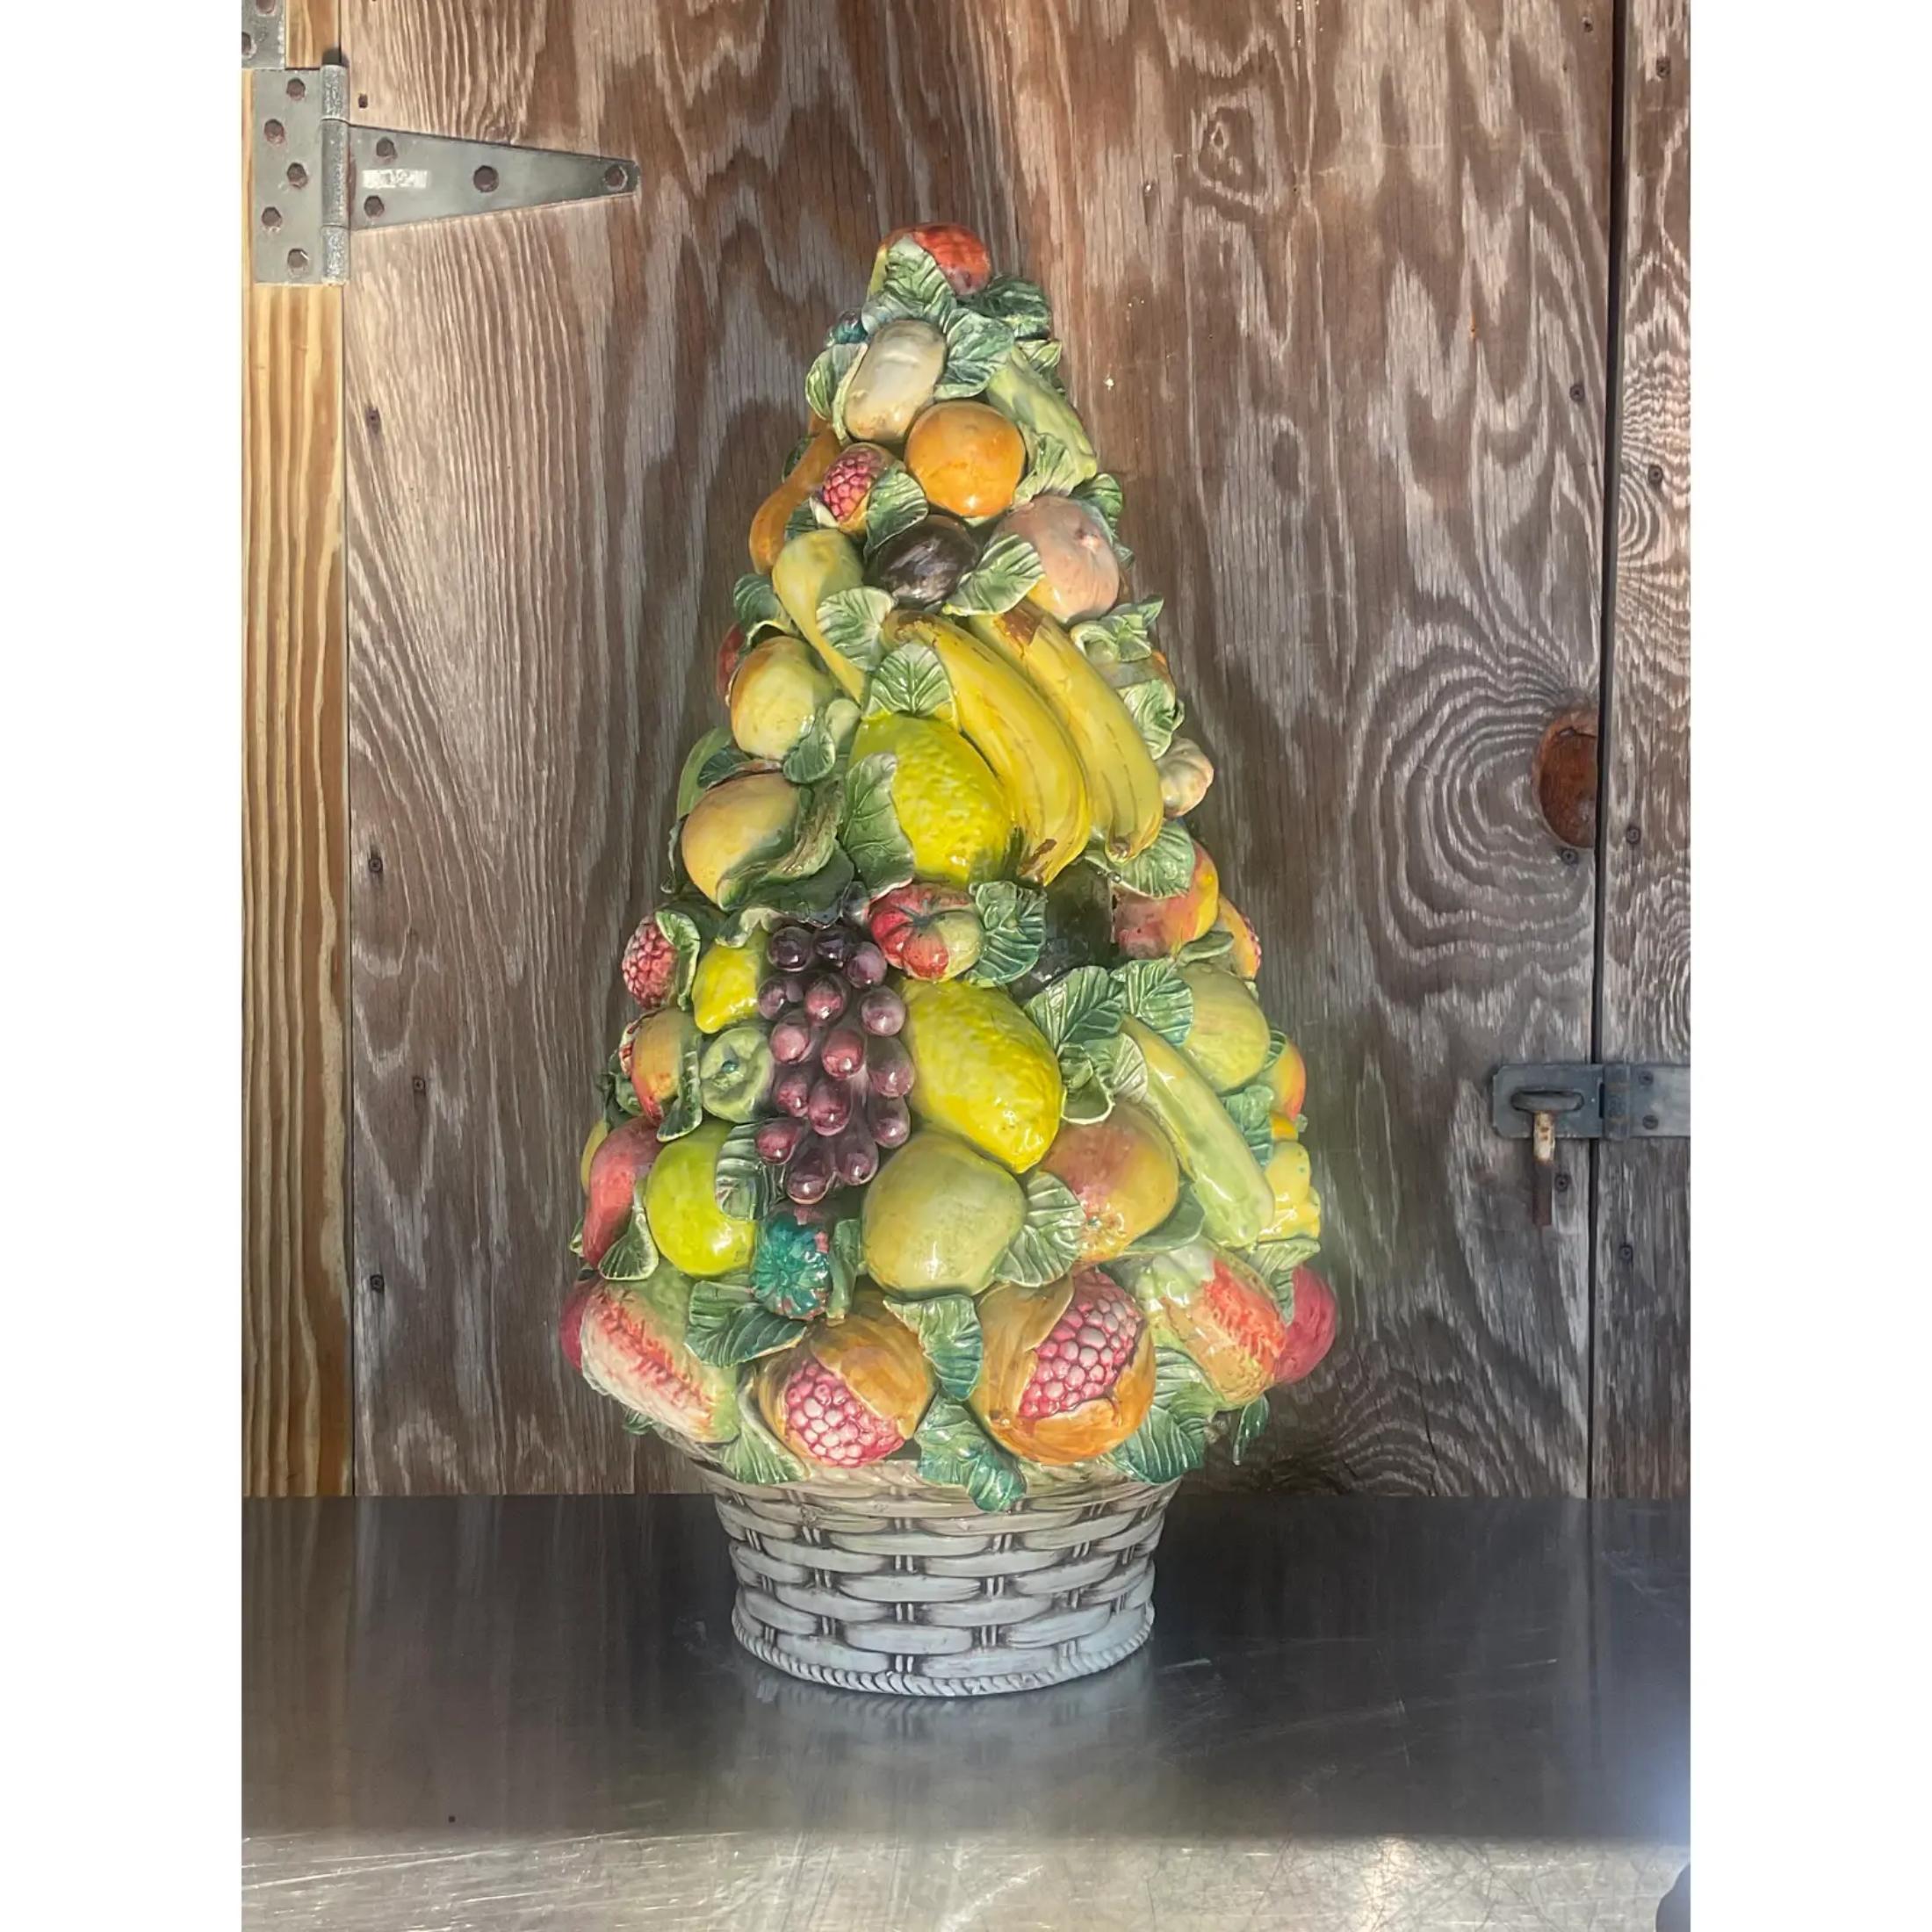 A fantastic monumental Italian fruit topiary. A beautiful stash of hand painted fruit in warm clear colors. Acquired from a Palm Beach estate.